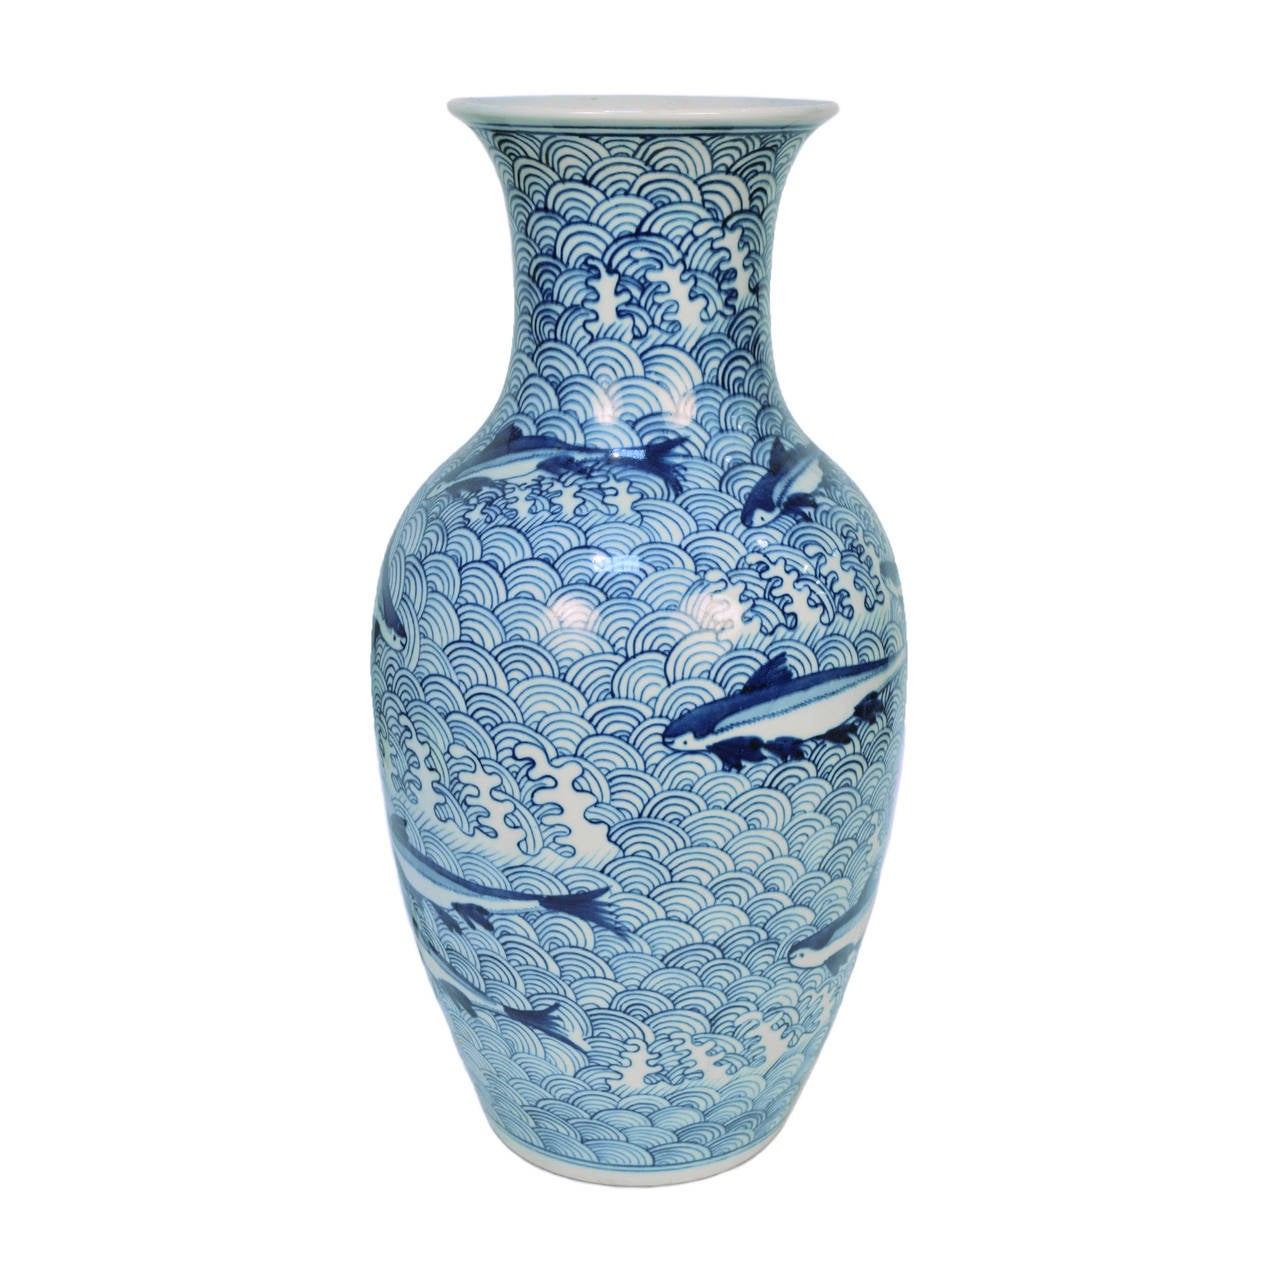 Blue and white vase with unusual fish and wave motif.